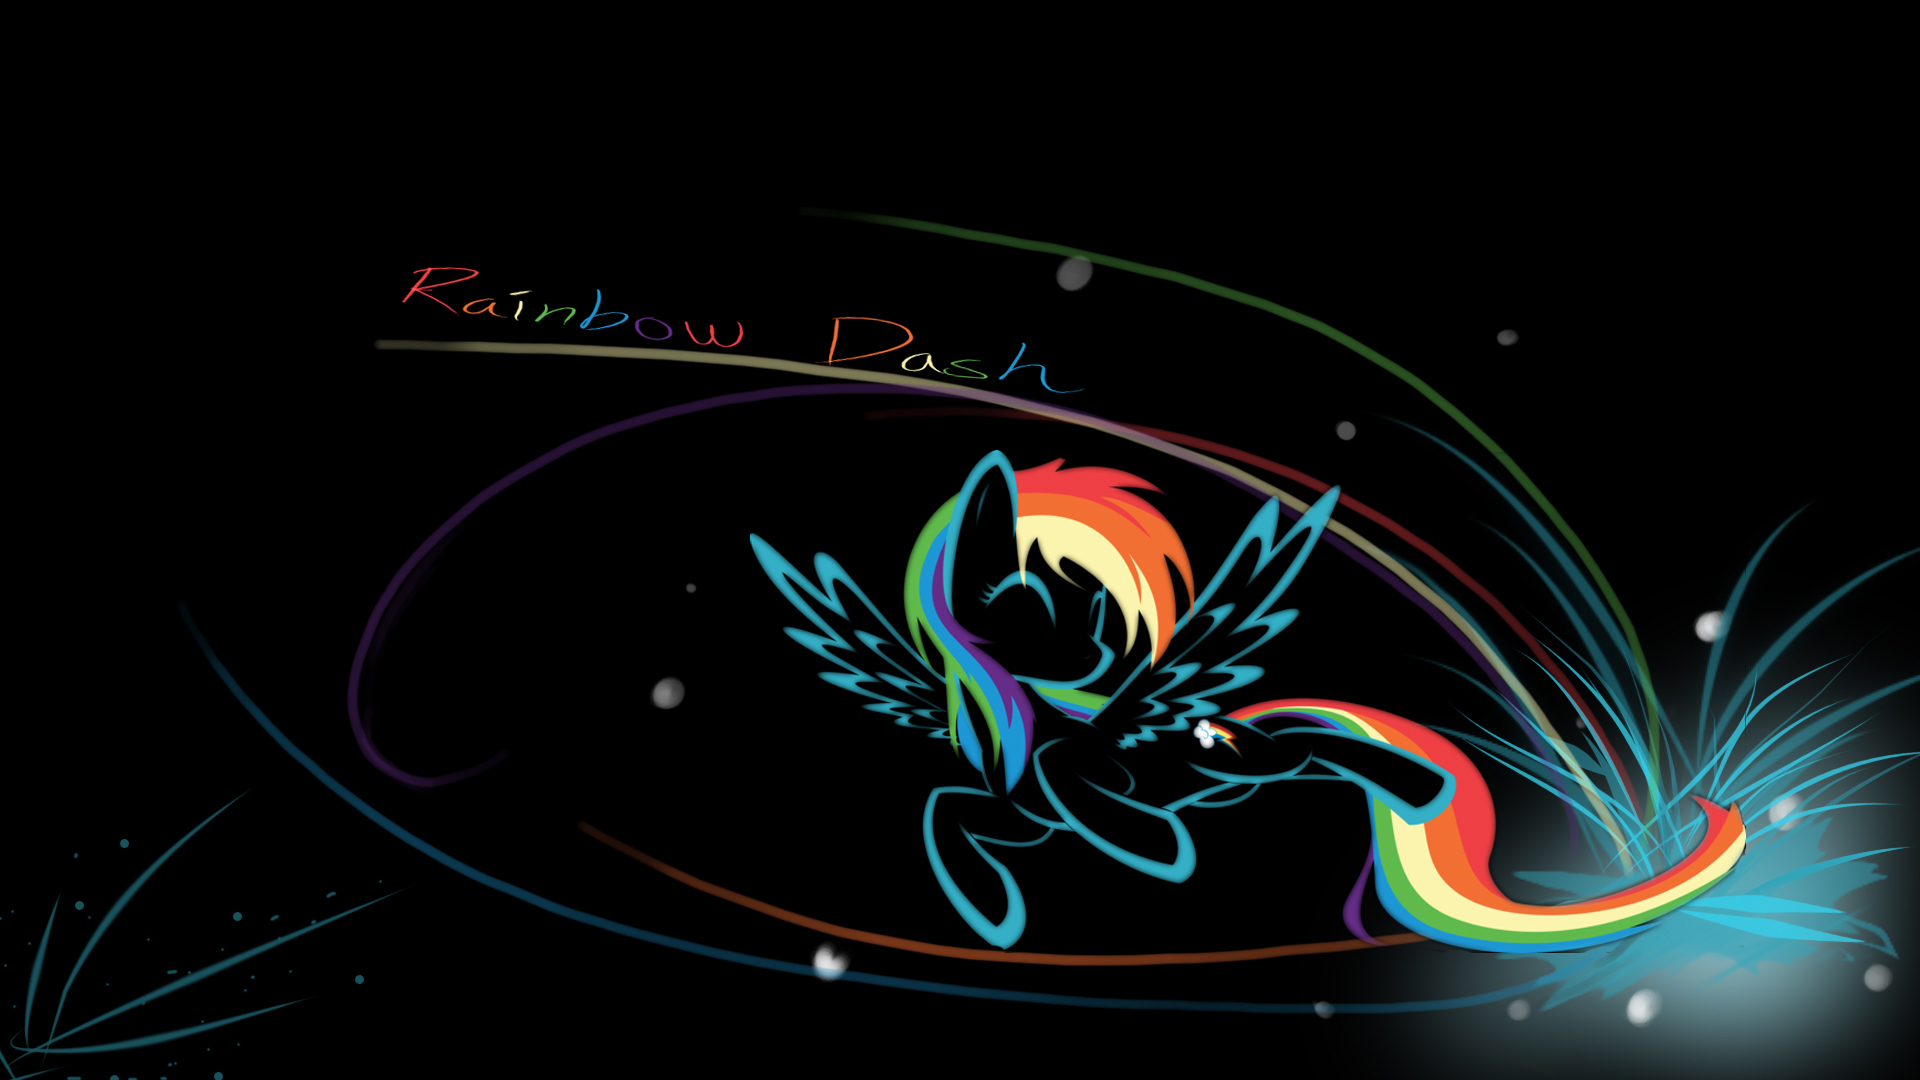 Rainbow Dash Wallpaper 1920x1080 Px by Pcyzicus and UP1TER